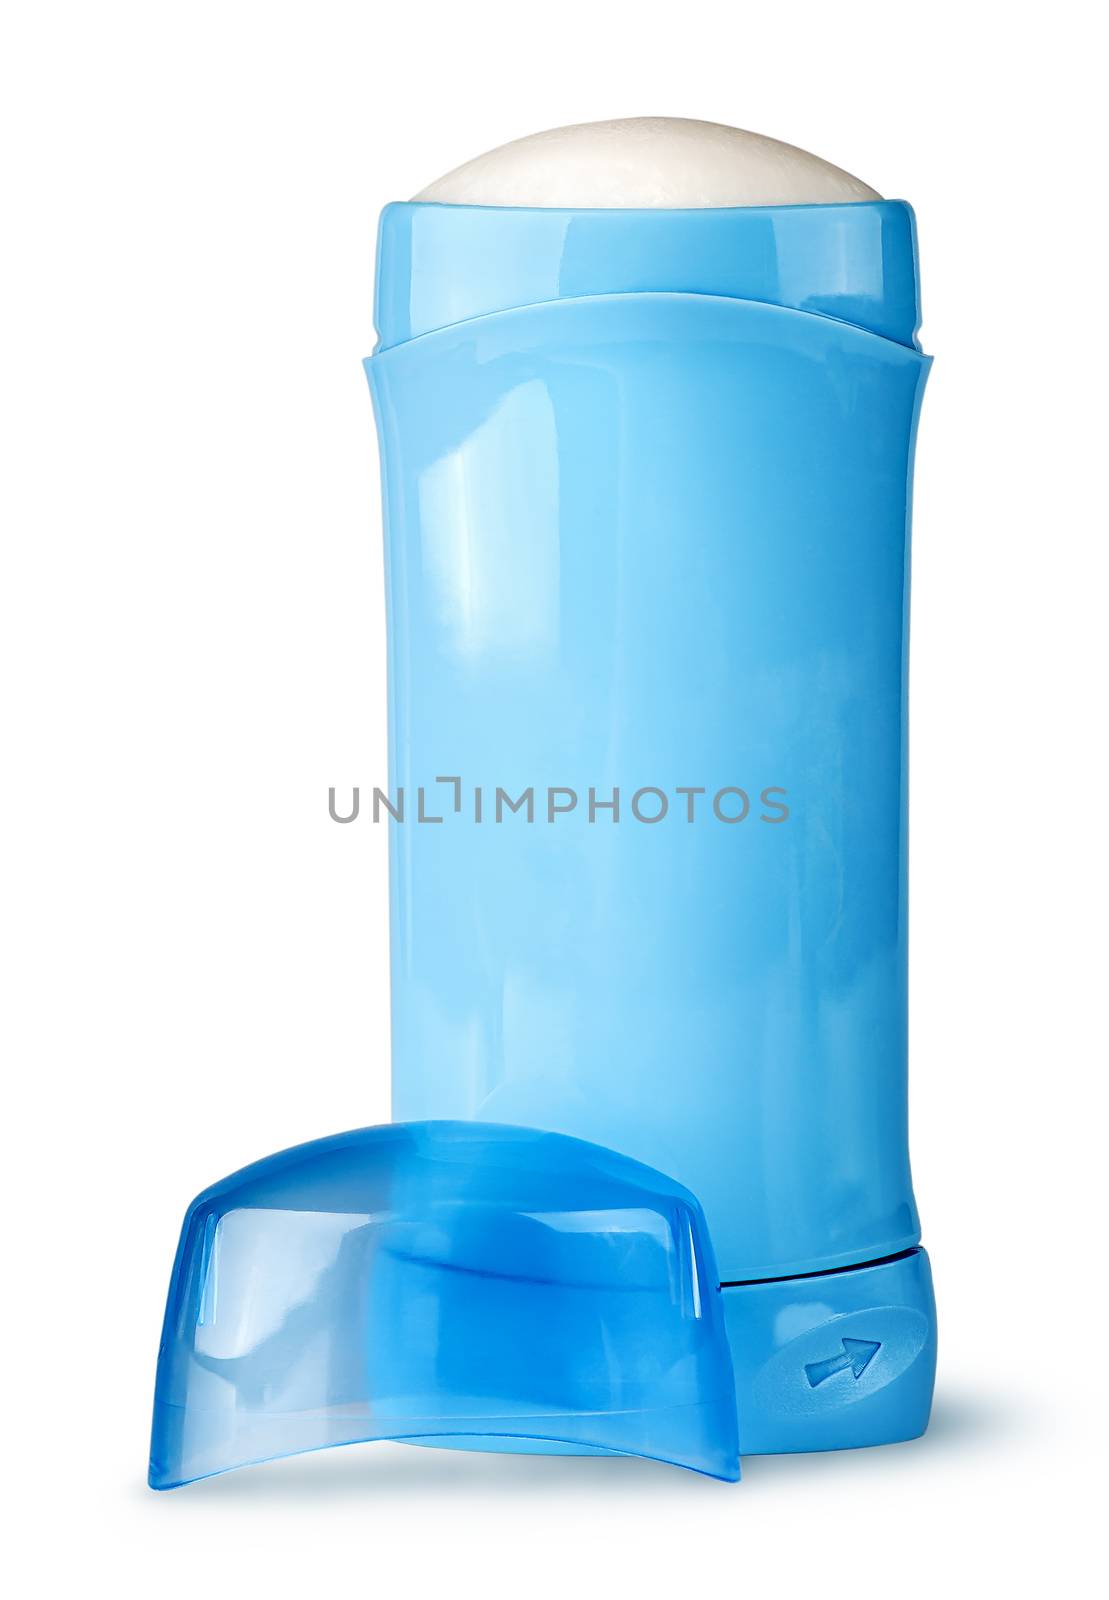 Blue deodorant container cap near isolated on white background